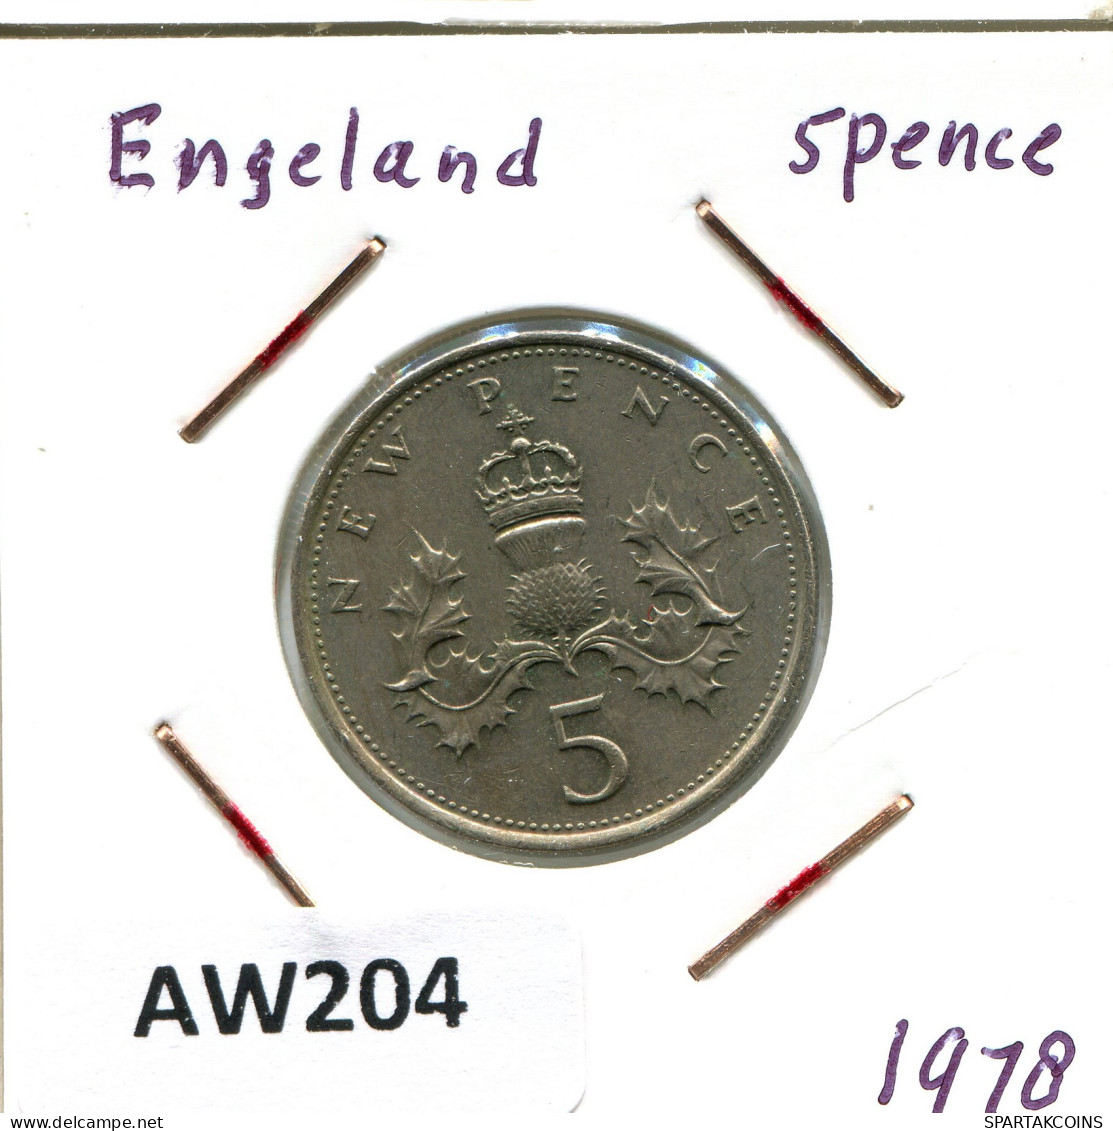 5 NEW PENCE 1978 UK GREAT BRITAIN Coin #AW204.U - 5 Pence & 5 New Pence